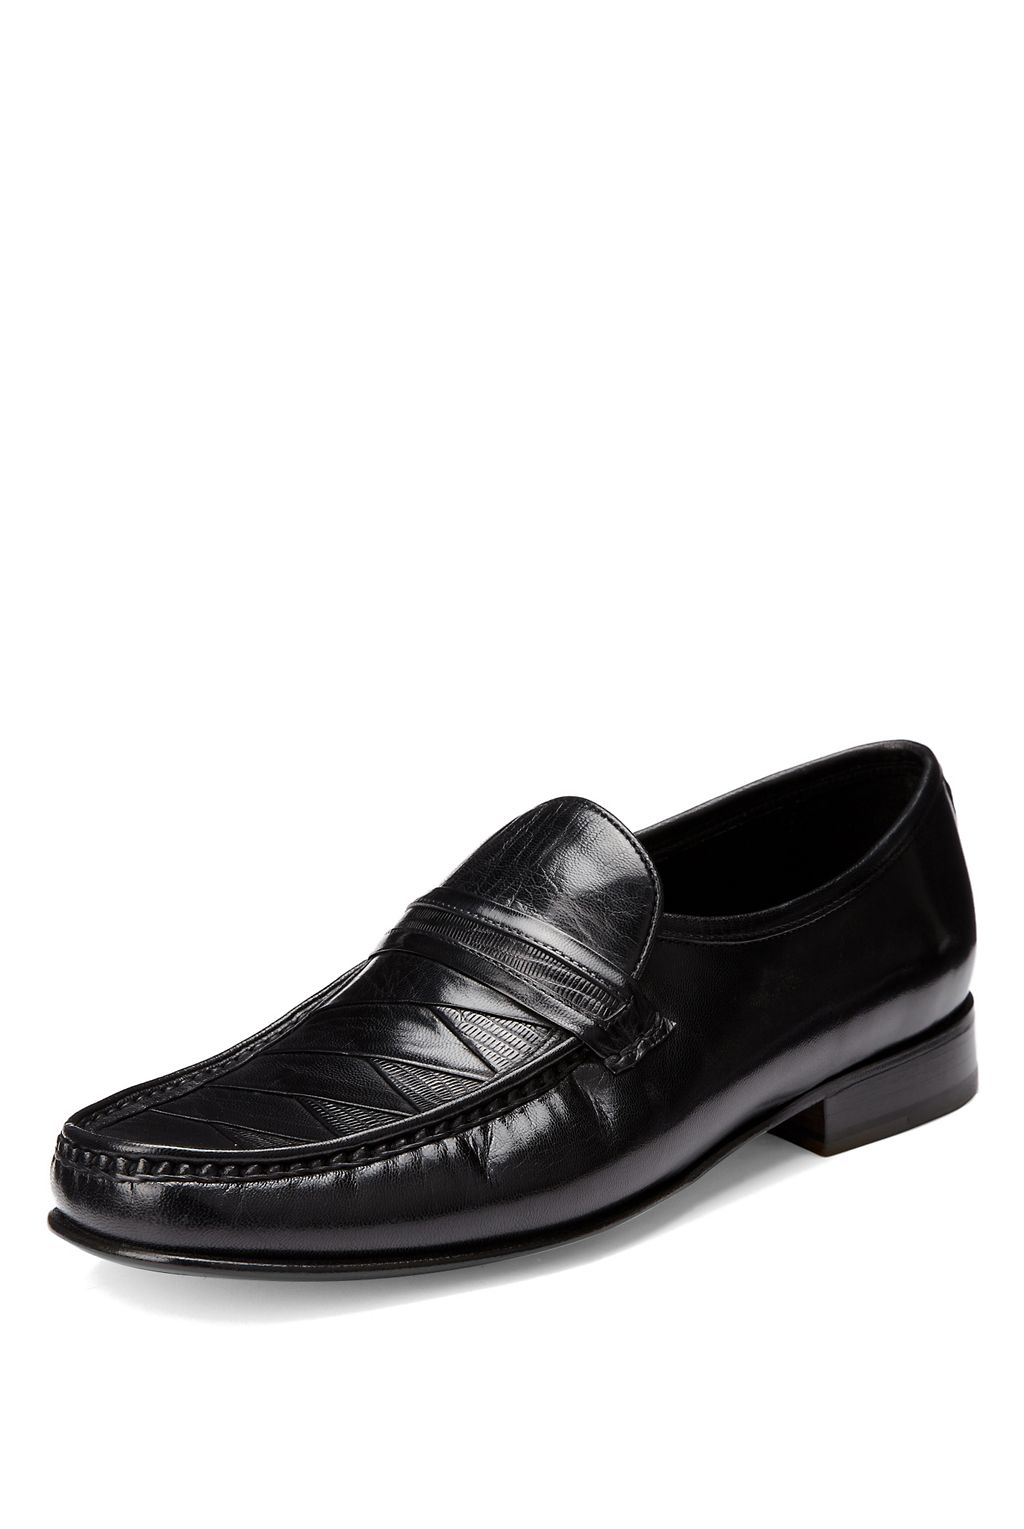 Leather Pleated Vamp Loafers 1 of 1